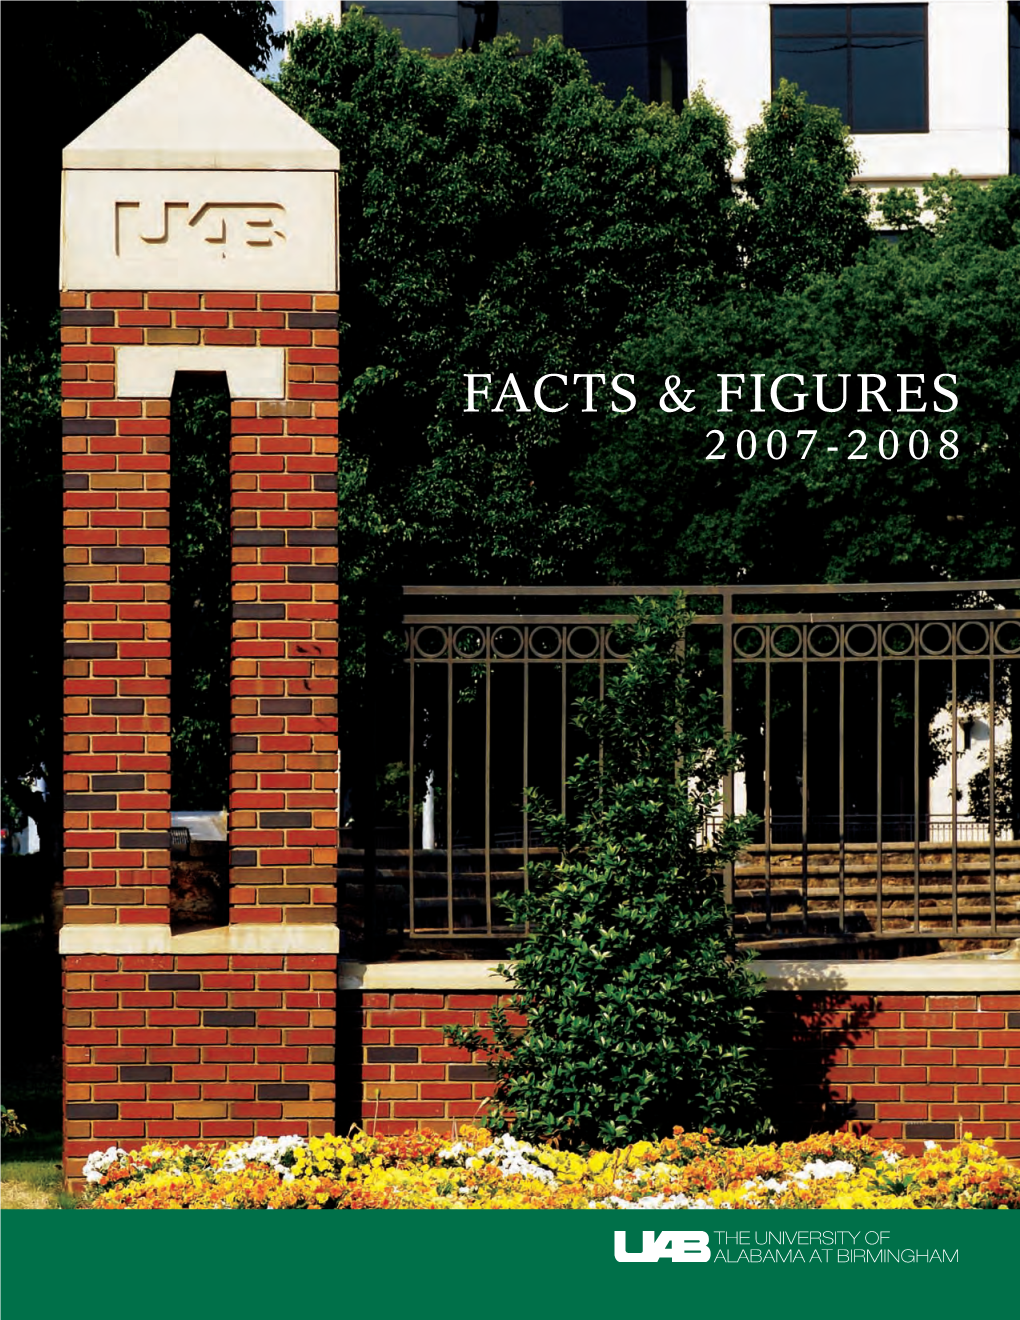 Facts & Figures 2007-2008